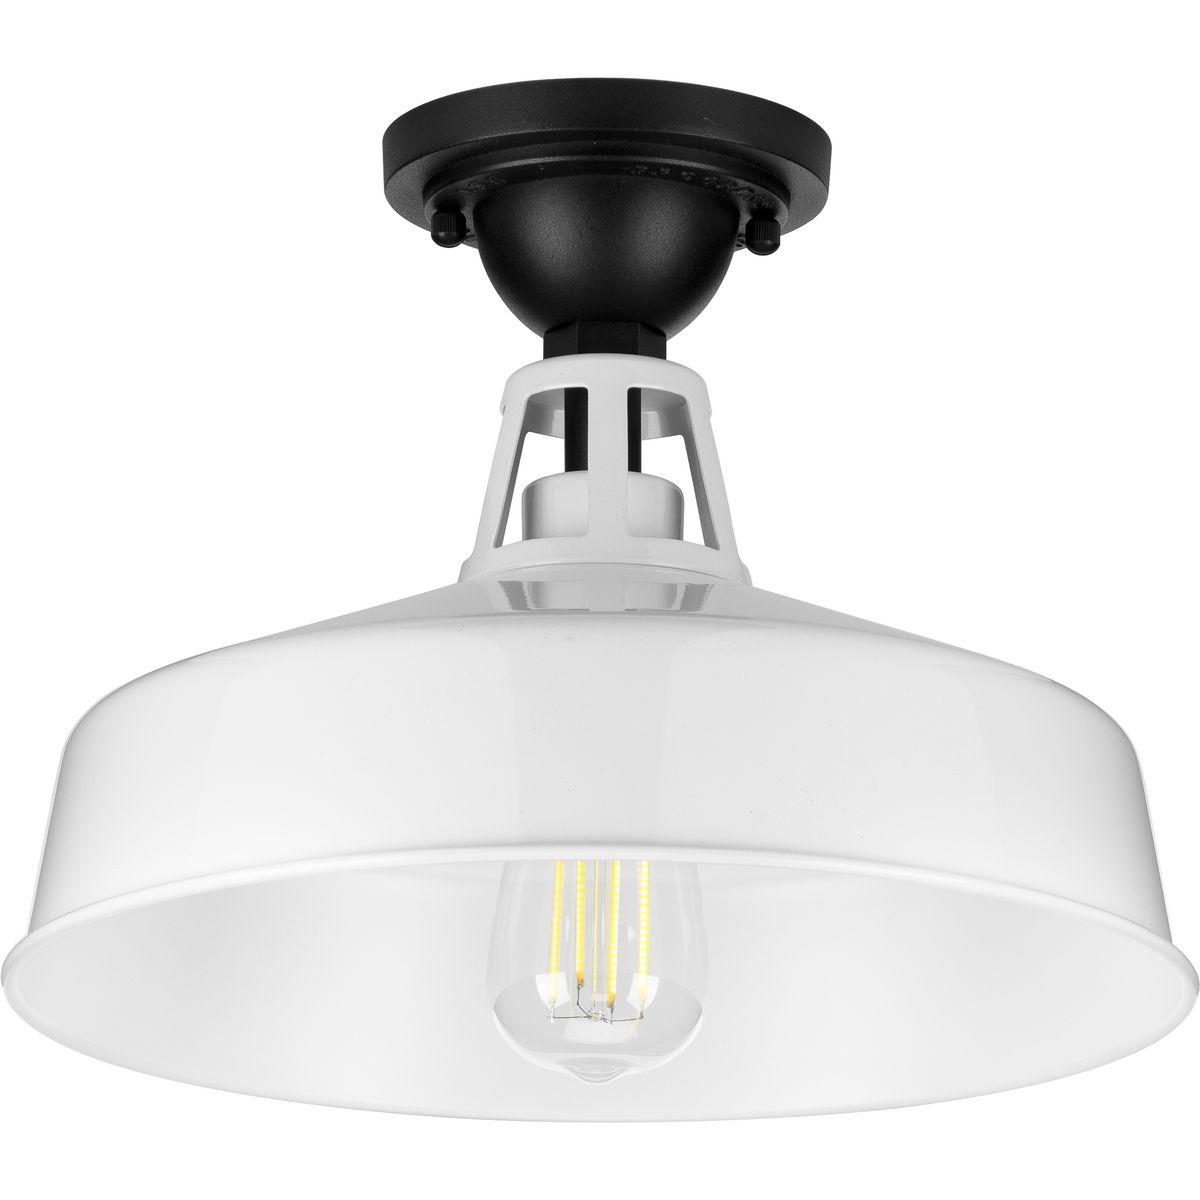 Hubbell P550070-030 This fun take on the traditional warehouse shade provides excellent task lighting. Take in the simple metal shade coated in a gorgeous white finish ready to direct a helpful glow. An industrial-style ceiling plate anchors the light fixture in place and ad